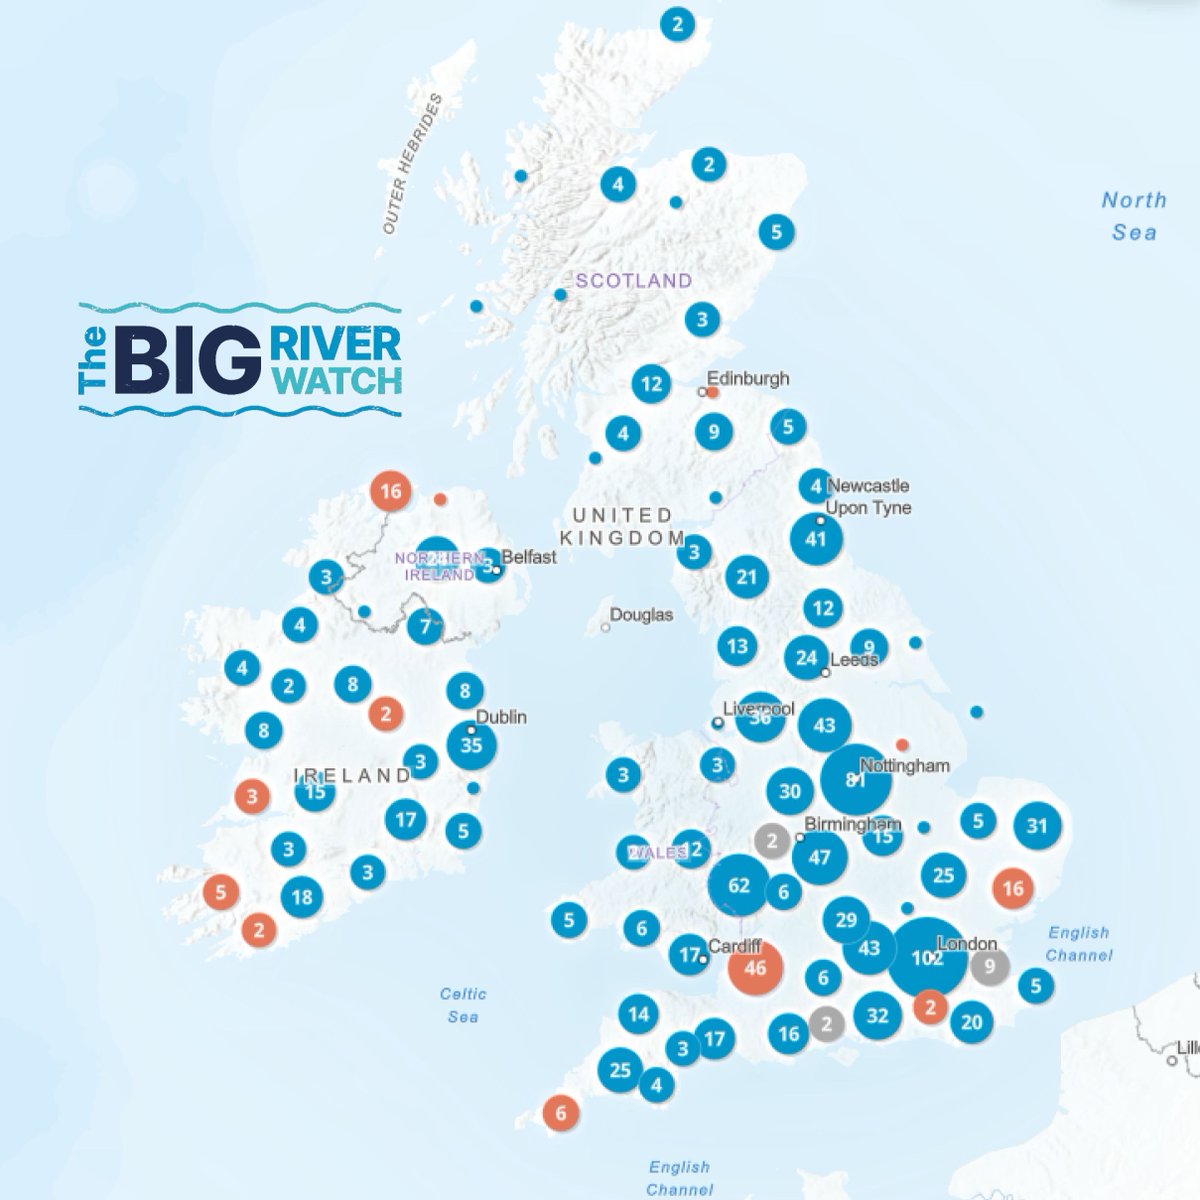 🤳2,000+ of you #BigRiverWatch-ed so far... But there's still time to fill in the map! All surveys submitted by midnight on Thurs 9th will be included in our analysis. So if you missed it or want to survey another stretch of #river, you can! Get the app: theriverstrust.org/take-action/th…